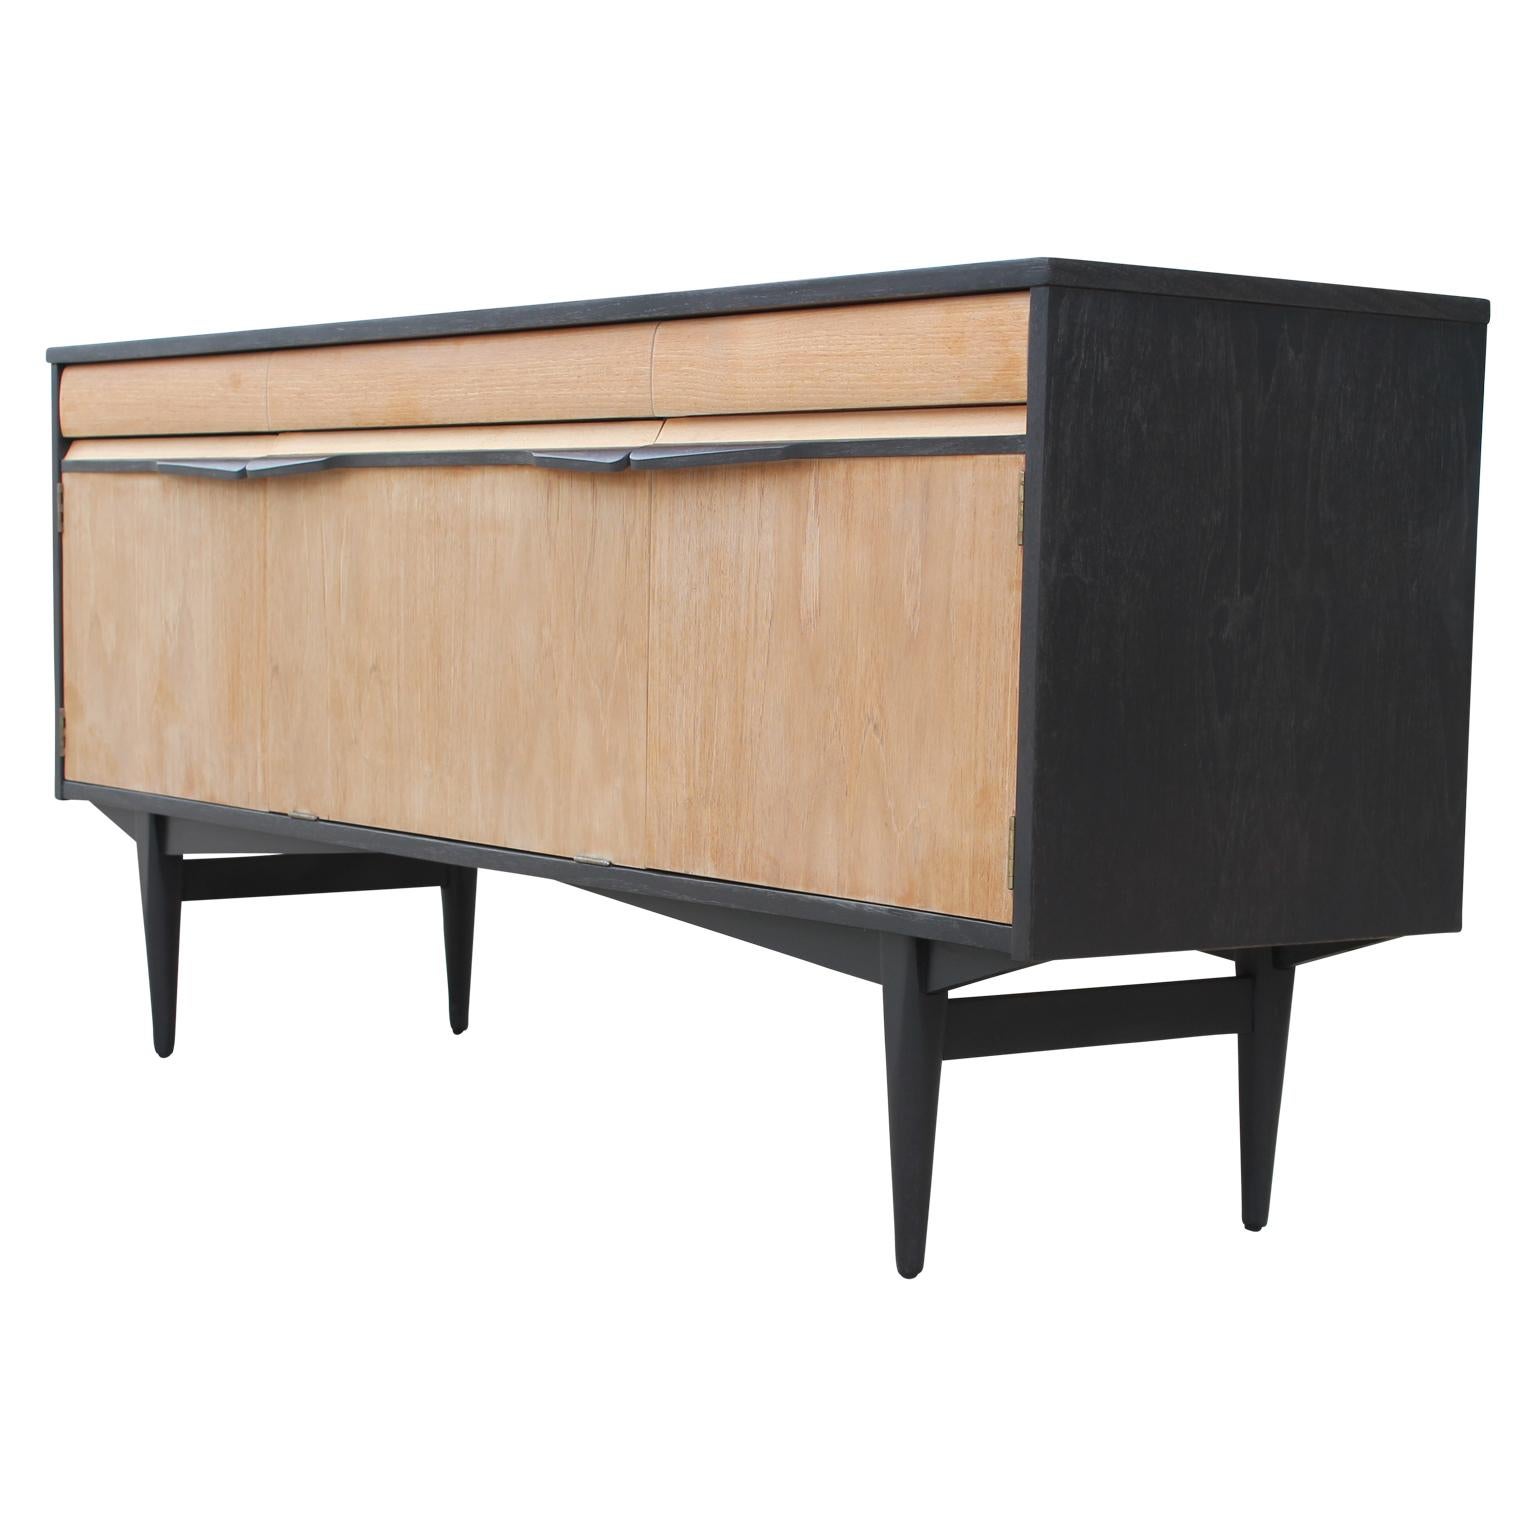 American Mid-Century Modern Two-Tone Clean Lined Credenza or Sideboard with Three Drawers